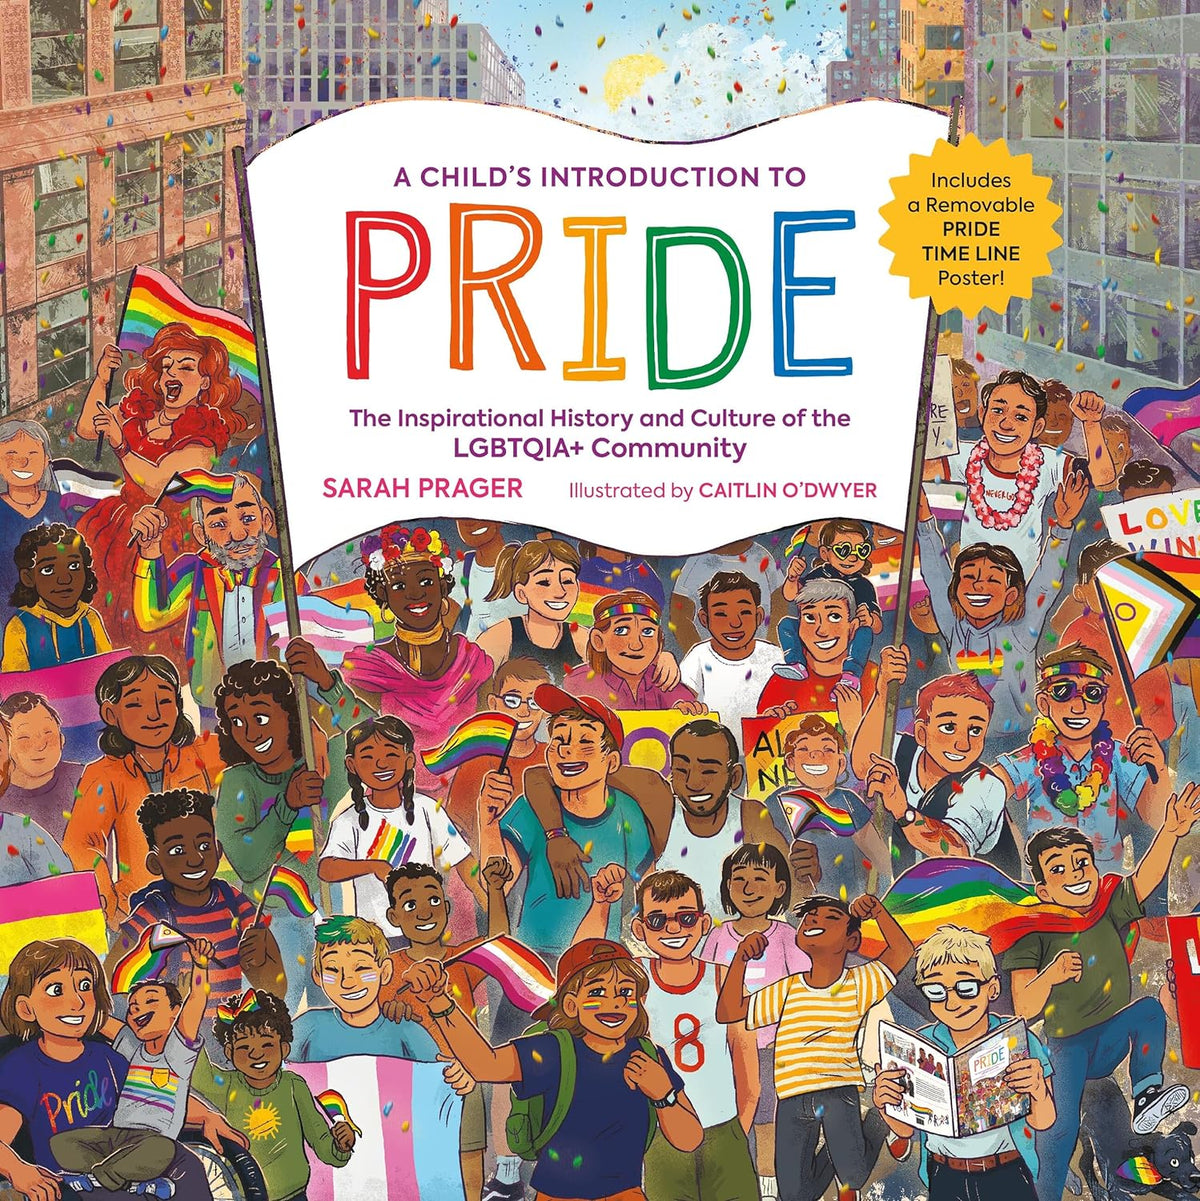 A Child's Introduction to Pride: The Inspirational History and Culture of the LGBTQIA+ Community